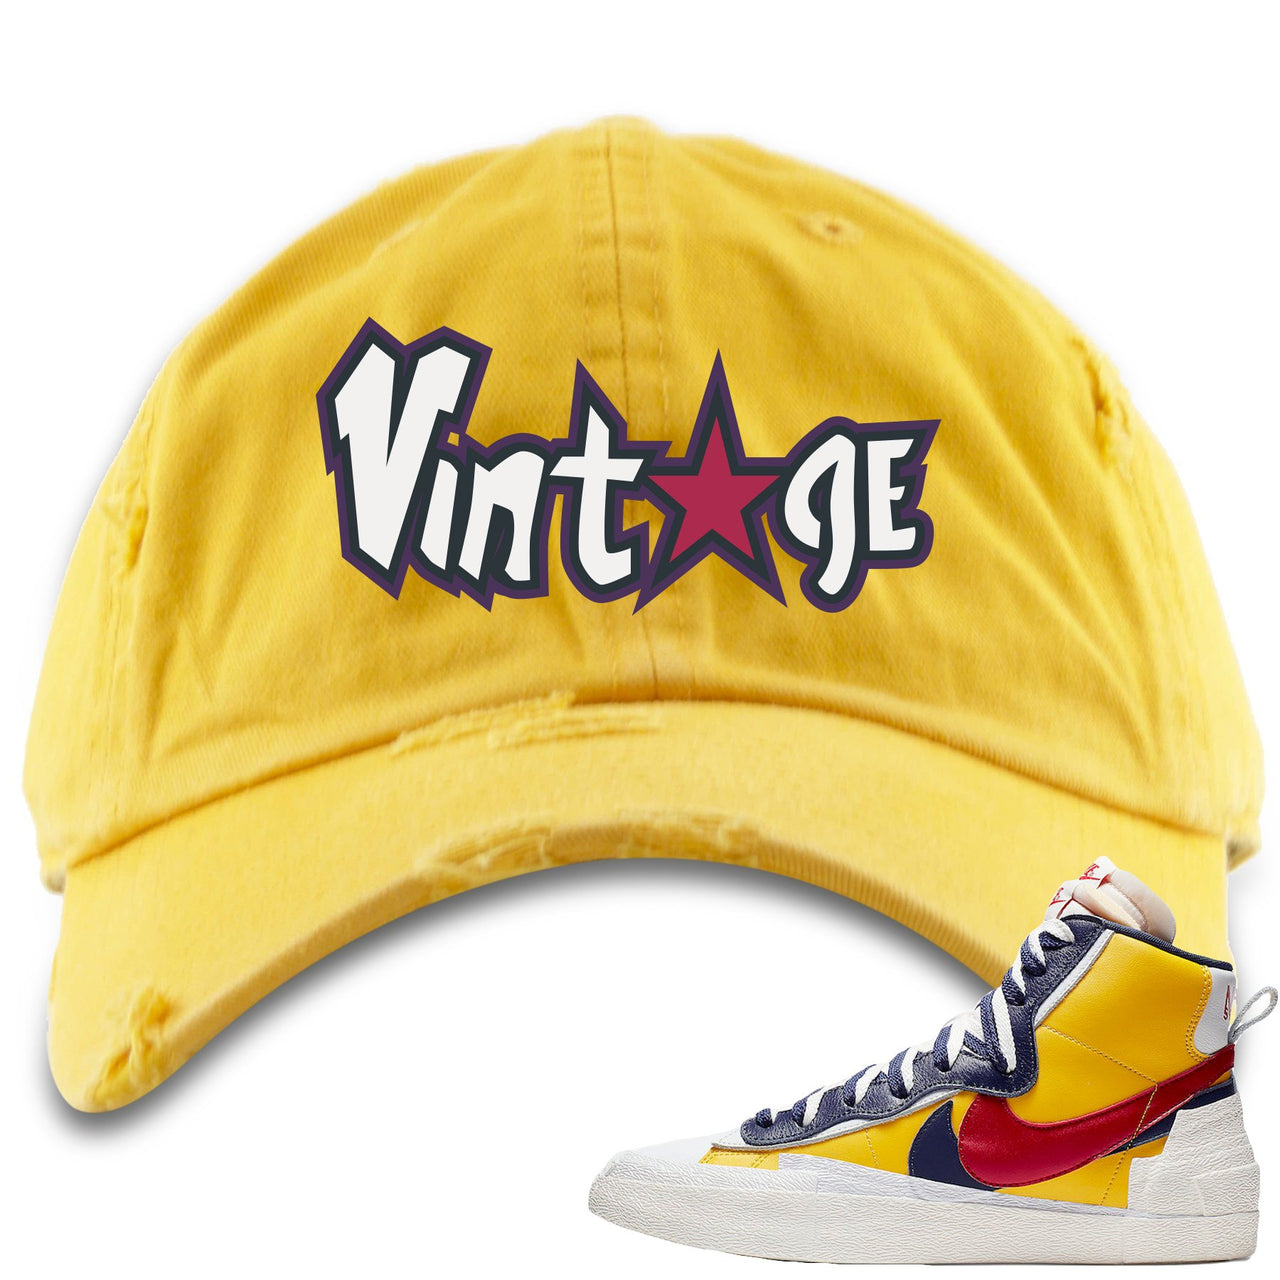 Varsity Maize Mid Blazers Distressed Dad Hat Vintage with Star Logo, Yellow